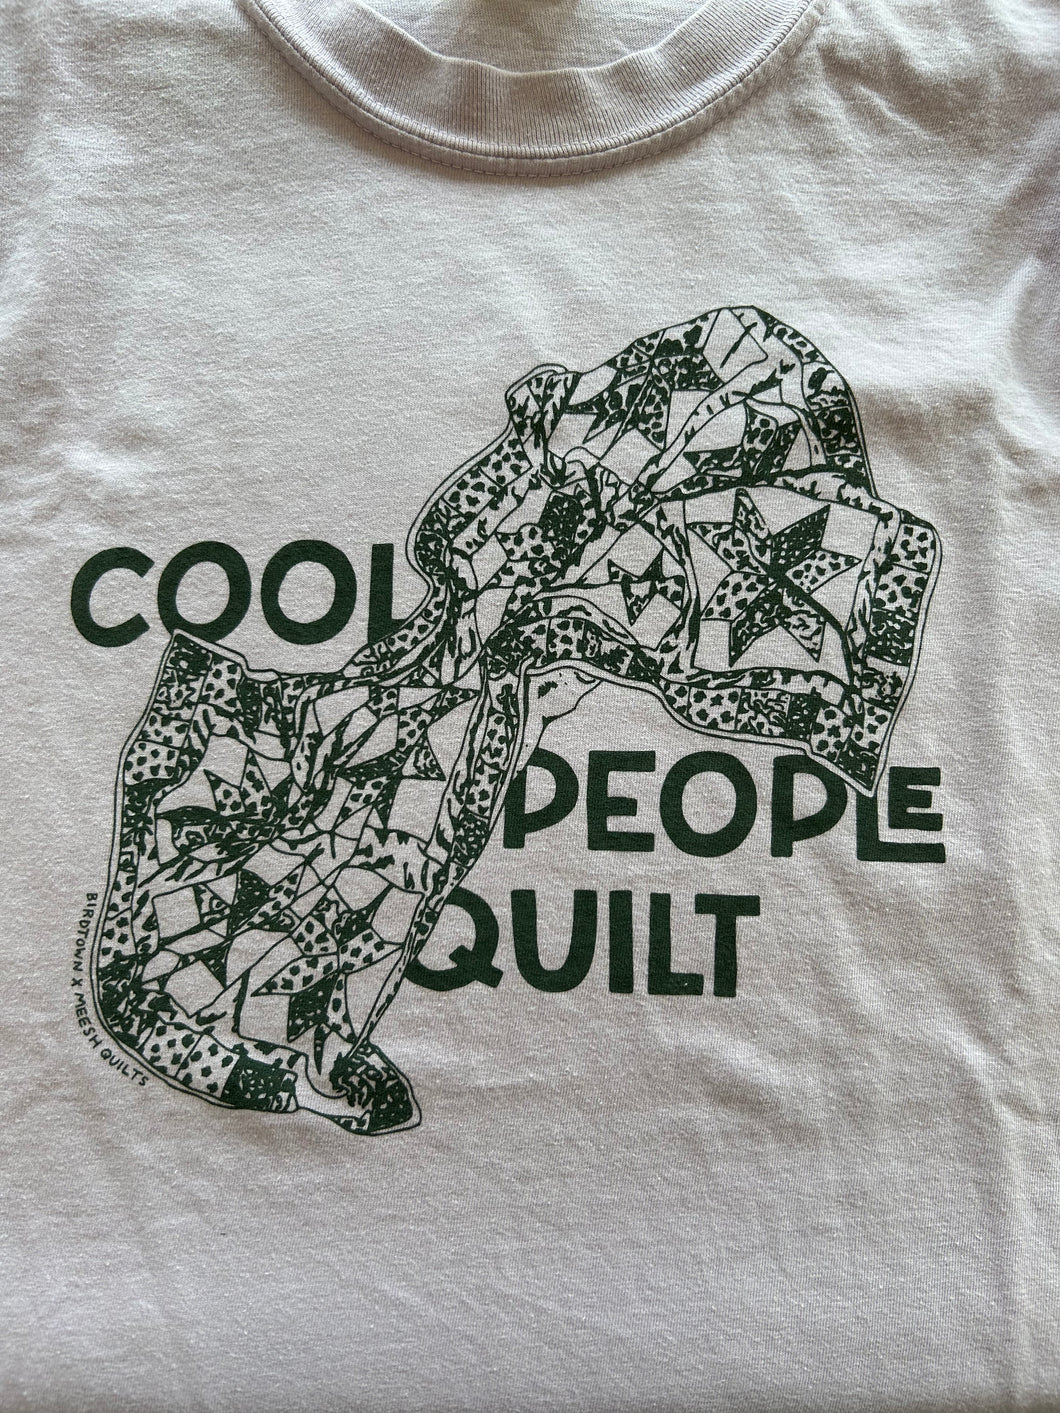 Cool People Quilt Long Sleeve Shirt